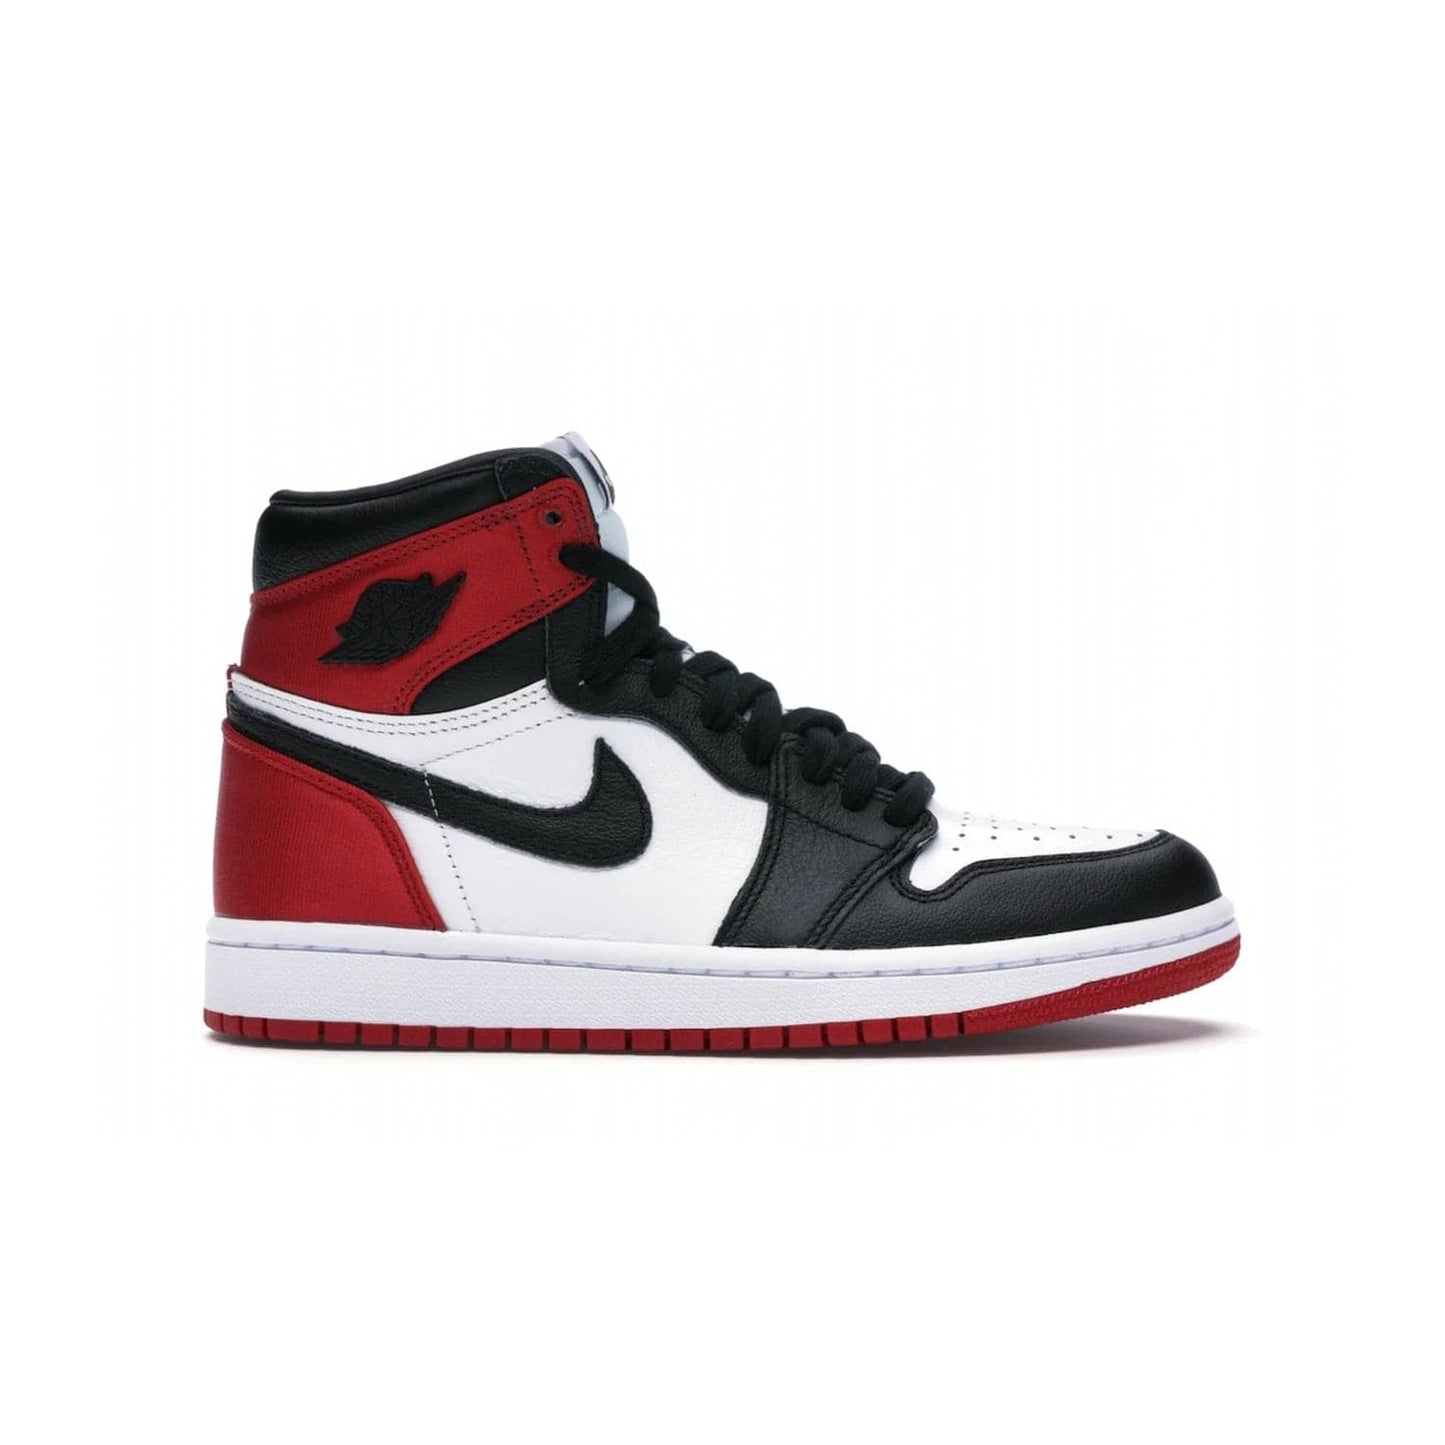 Jordan 1 Retro High Satin Black Toe (Women's) - Image 1 - Only at www.BallersClubKickz.com - Luxurious take on the timeless Air Jordan 1. Features a mix of black leather and satin materials with subtle University Red accents. Elevated look with metal Wings logo on the heel. Released in August 2019.